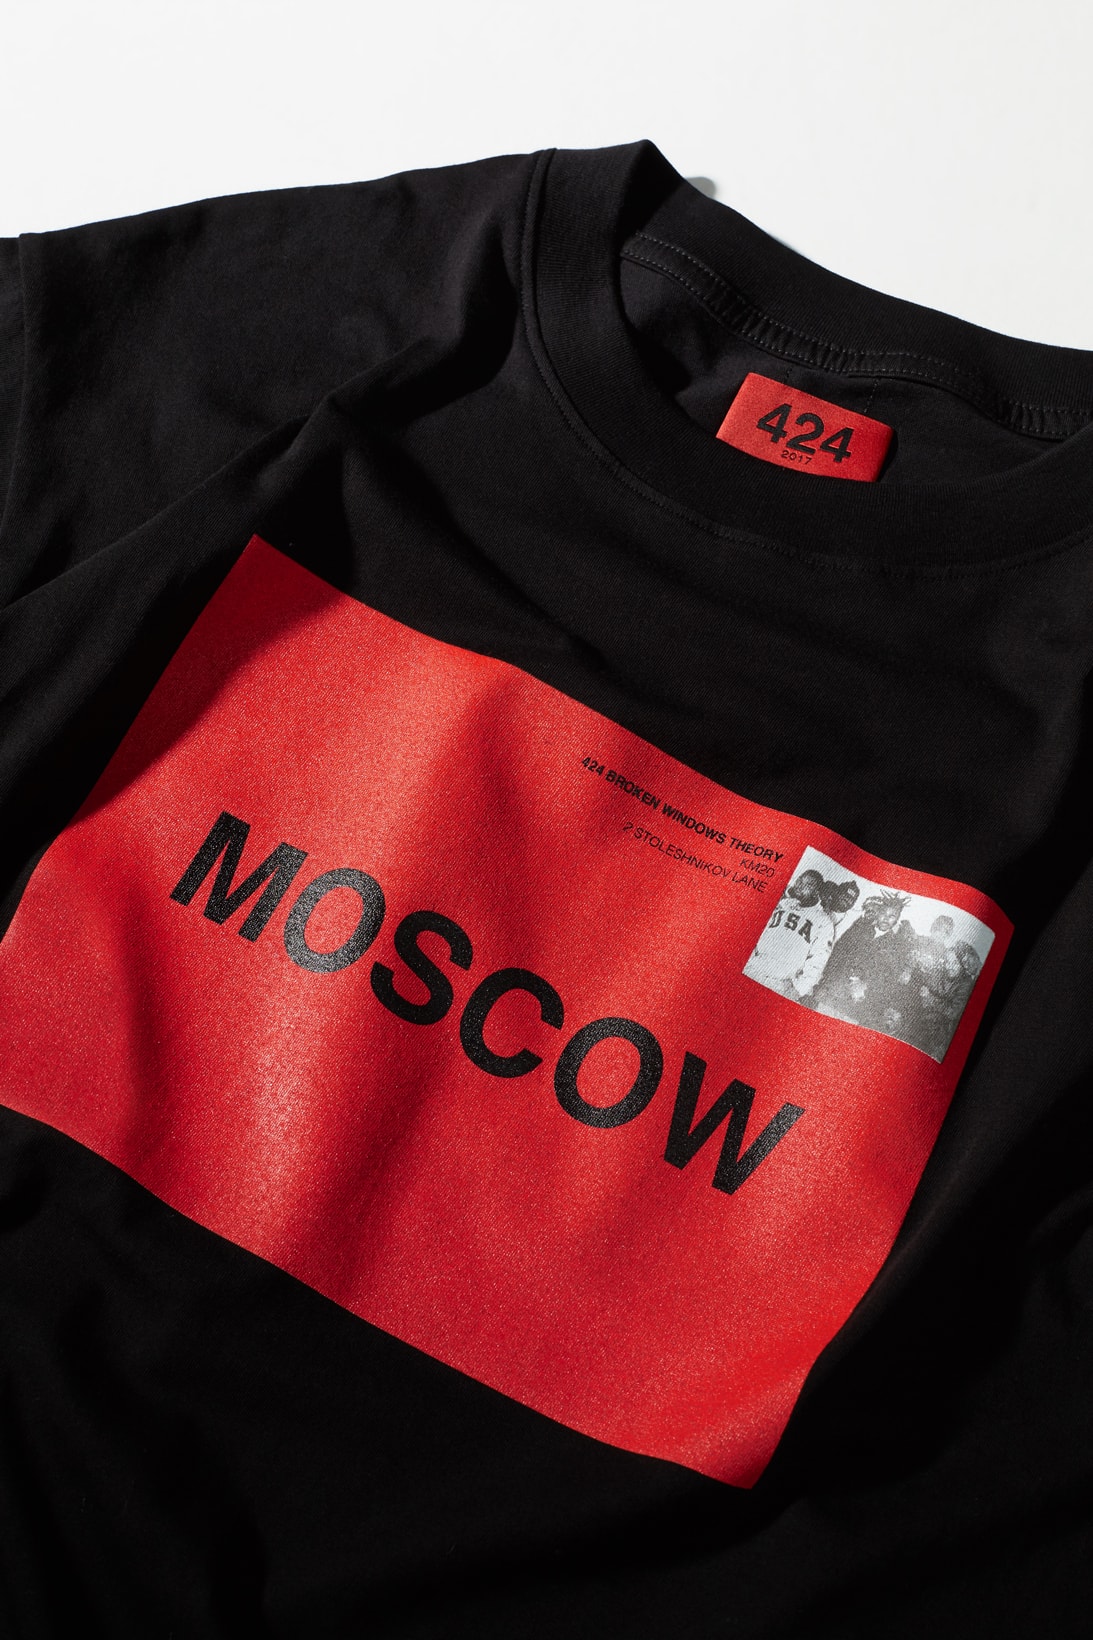 424 KM20 Collaboration Moscow T Shirt Hoodie Sweatshirt Black Red 2017 November 4 Release Date Info